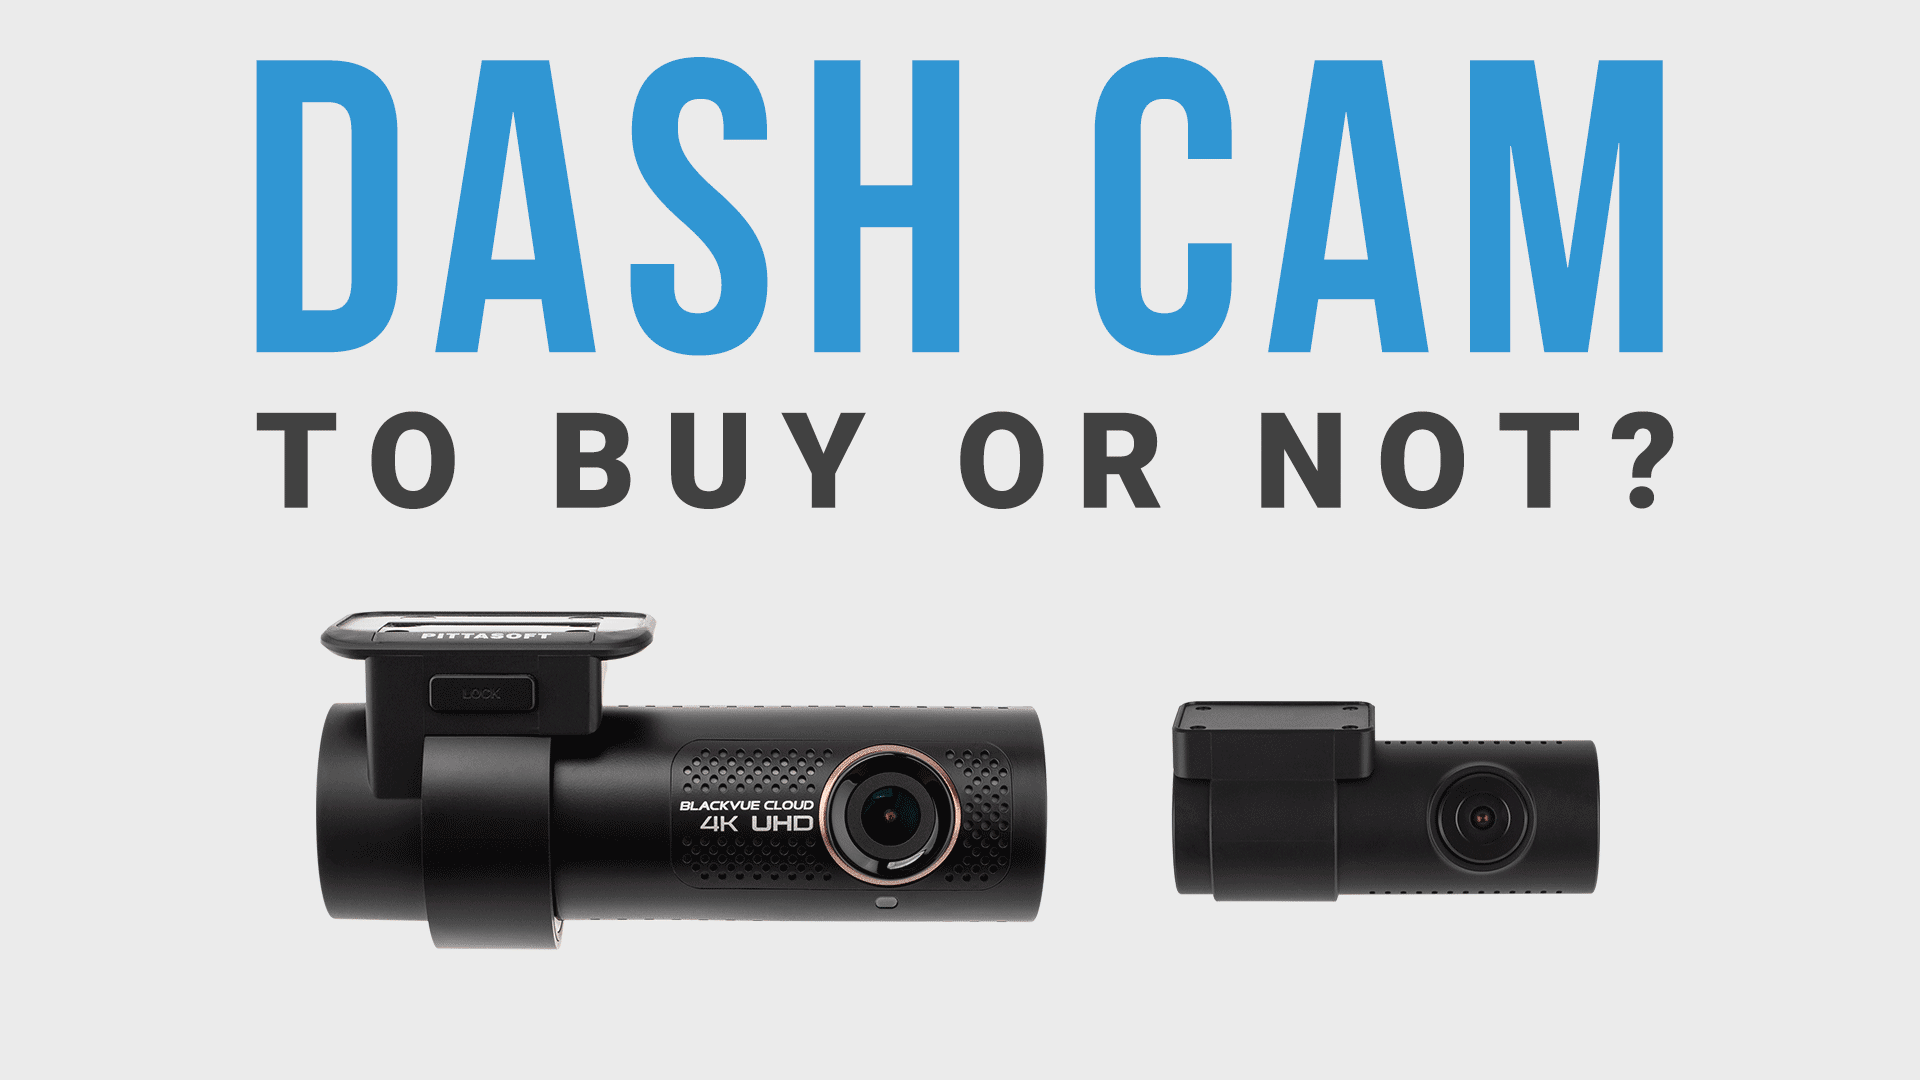 Dashcam – To Buy Or Not